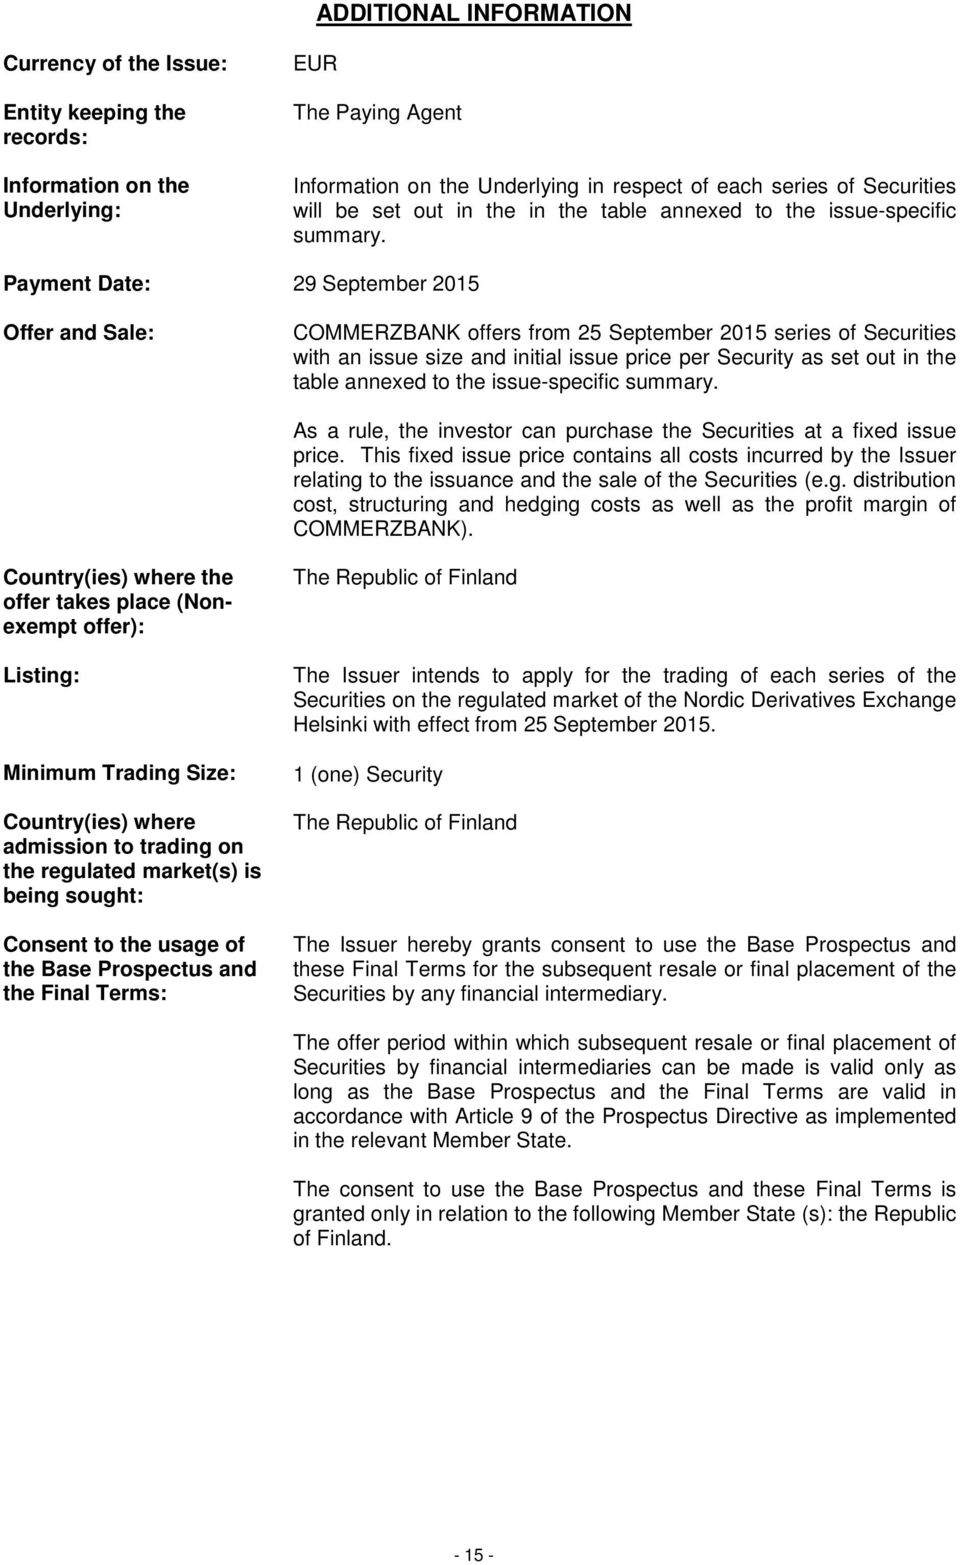 Payment Date: 29 September 2015 Offer and Sale: COMMERZBANK offers from 25 September 2015 series of Securities with an issue size and initial issue price per Security as set out in the table annexed